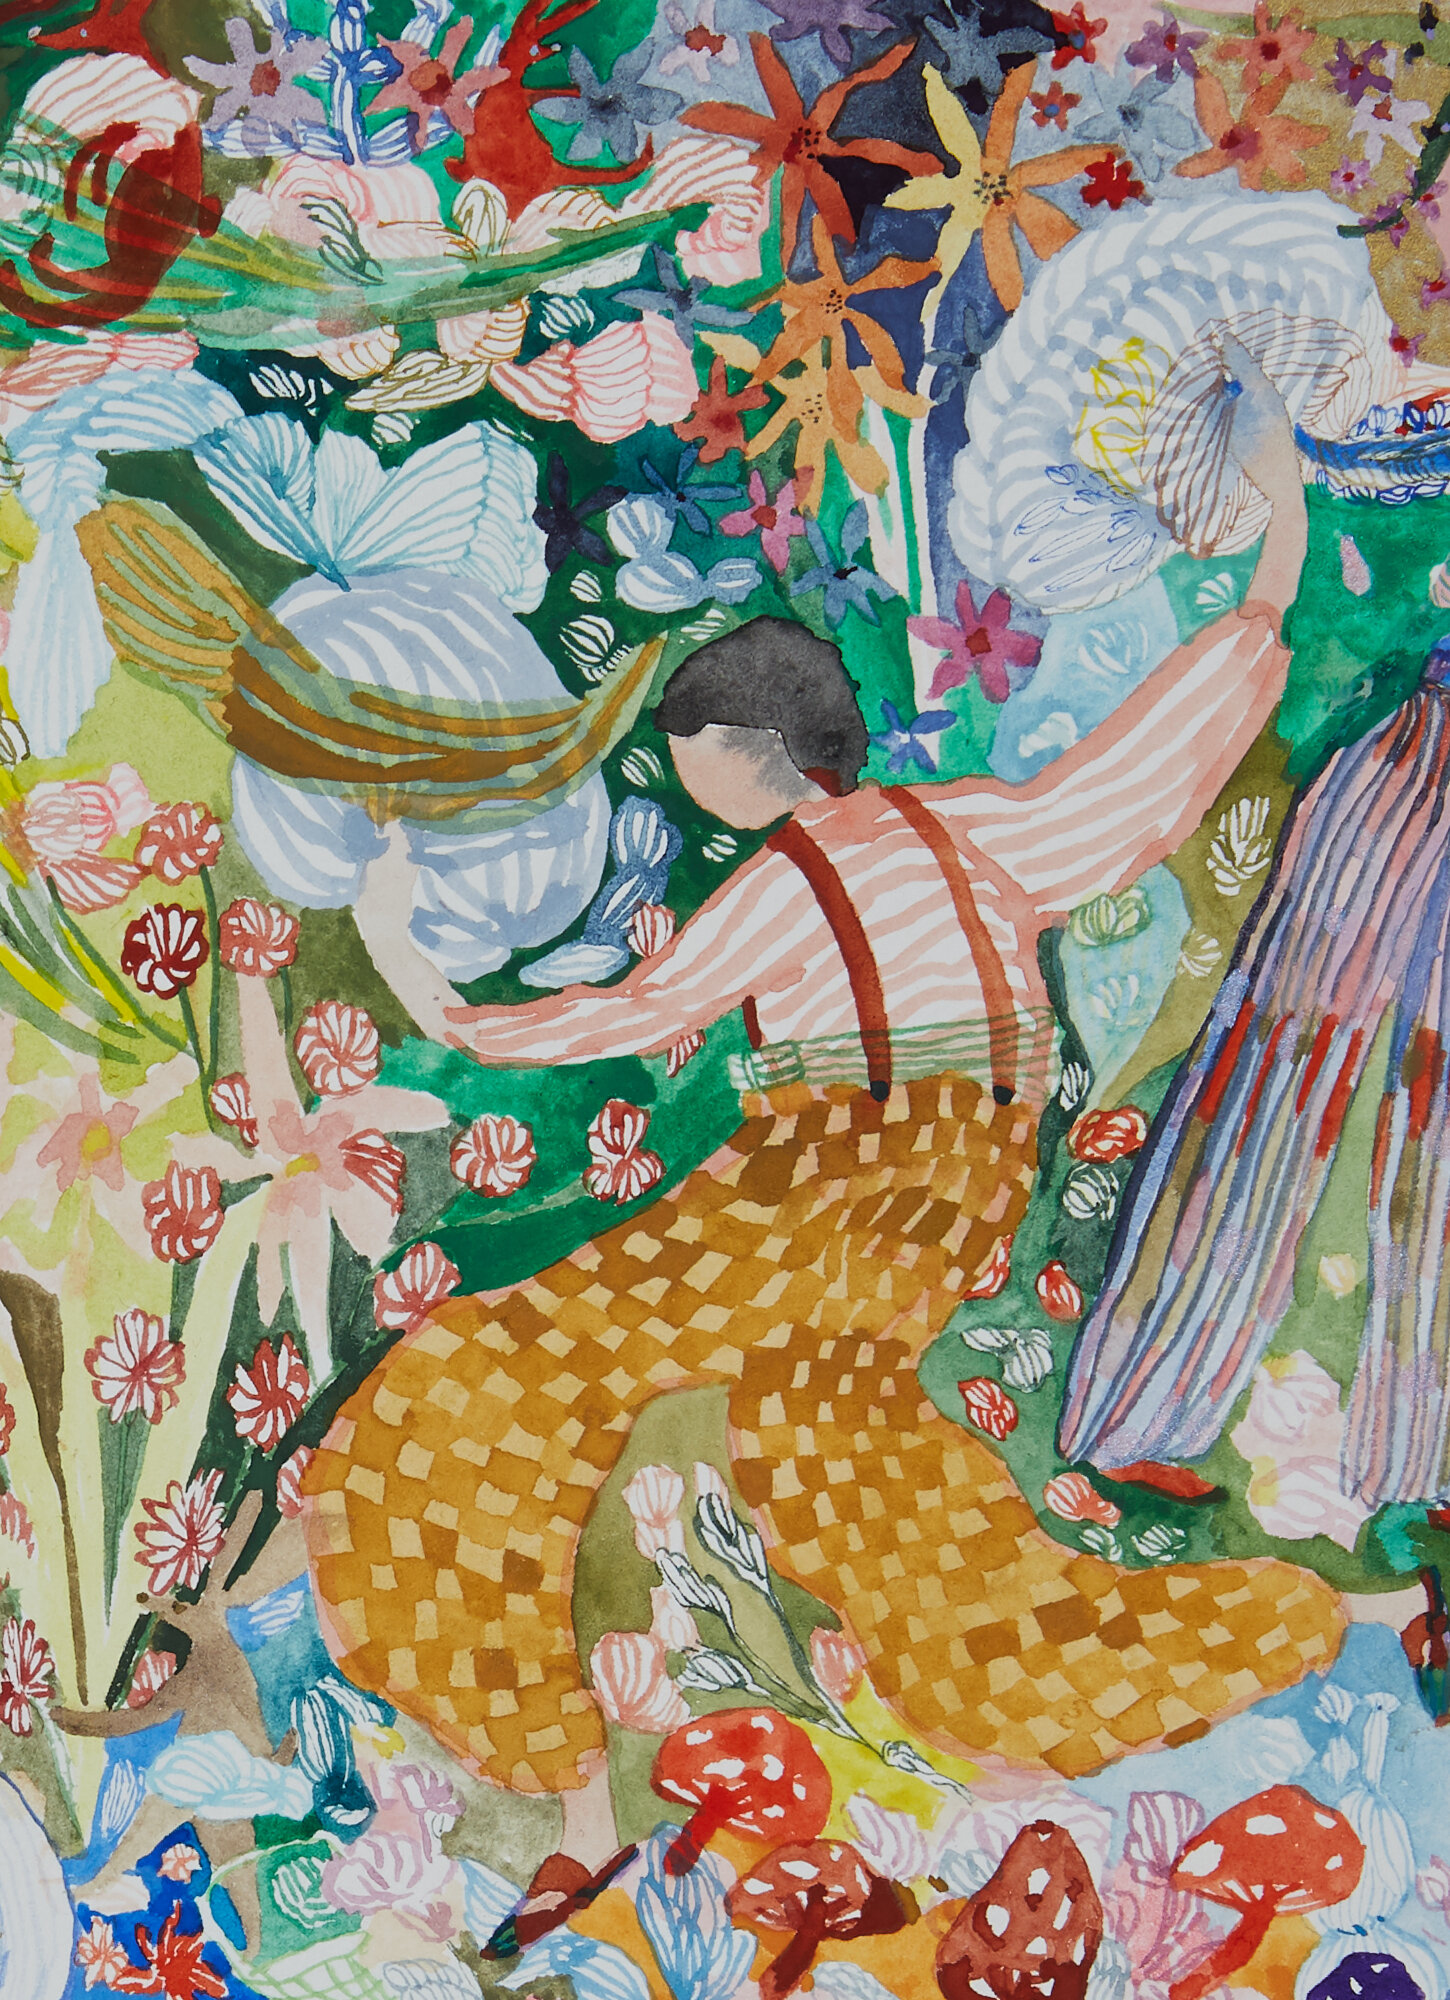   Garden of Dreams, Sweetness of Life Overflows, detail   Watercolor on paper, 2019  9” x 12”  Sold 